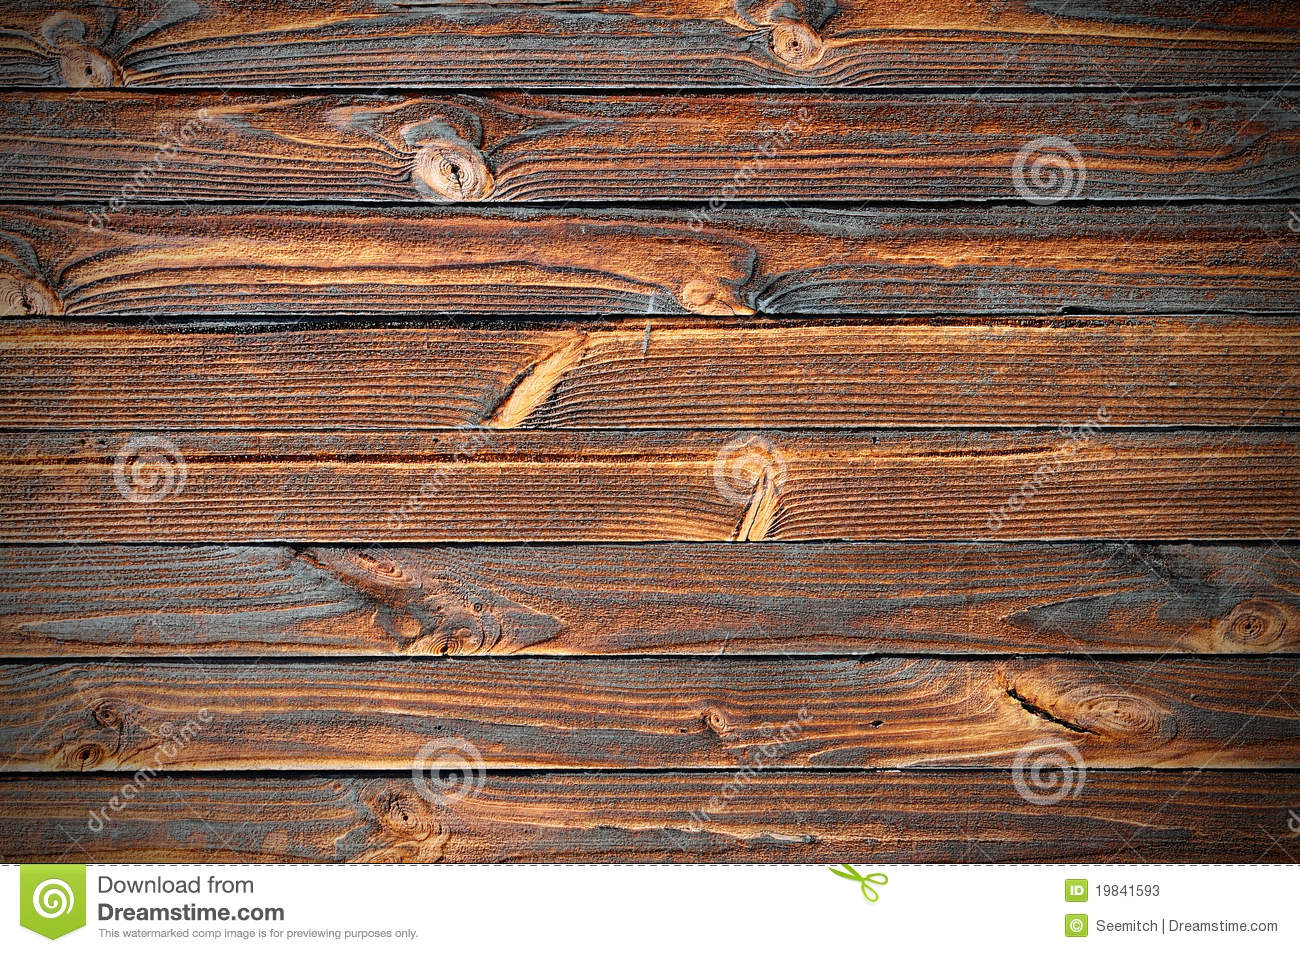 Related Pictures Of Old Wood Planks Texture Background Royalty